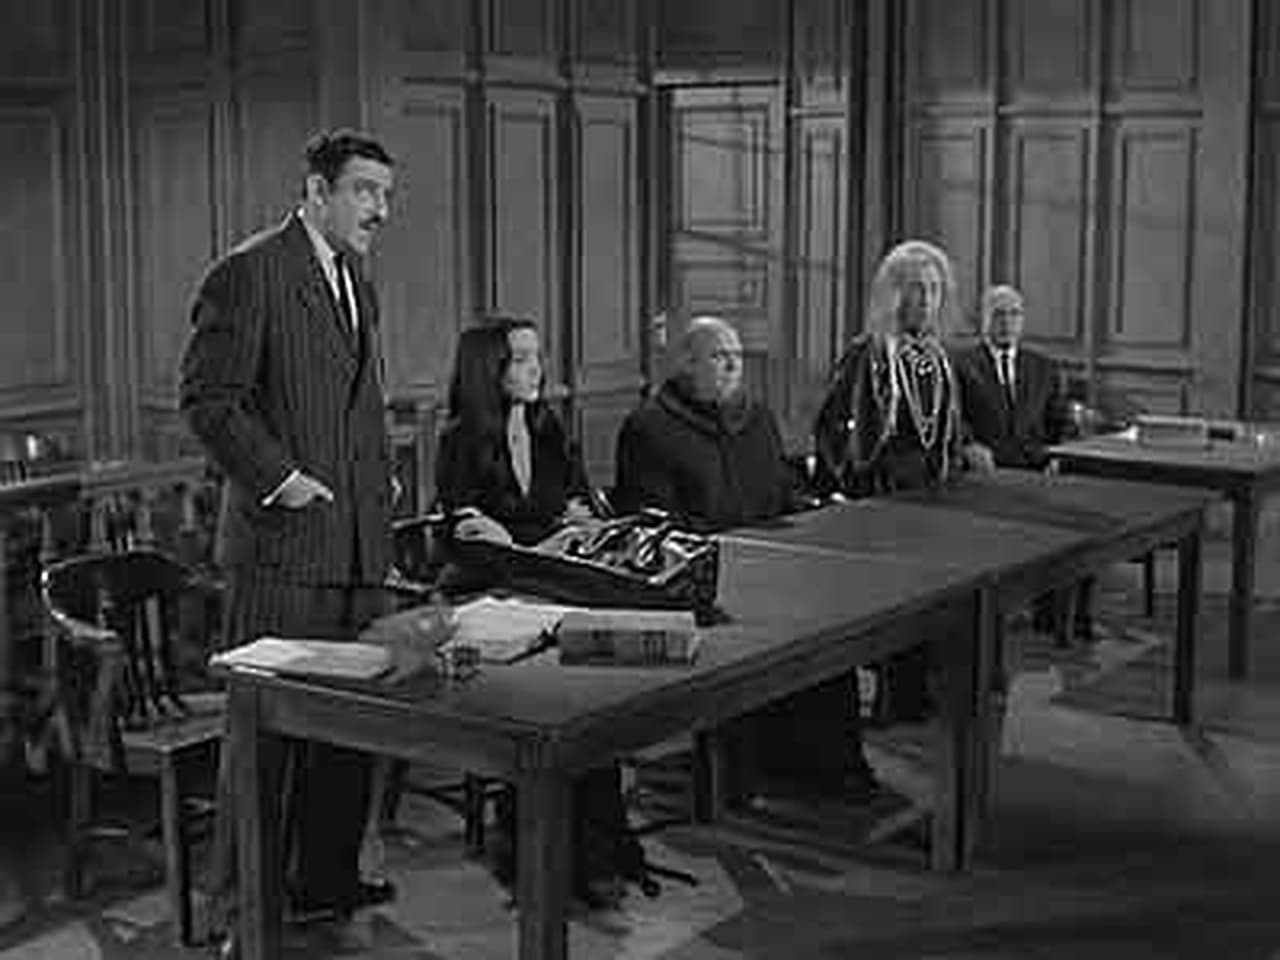 The Addams Family - Season 1 Episode 21 : The Addams Family in Court